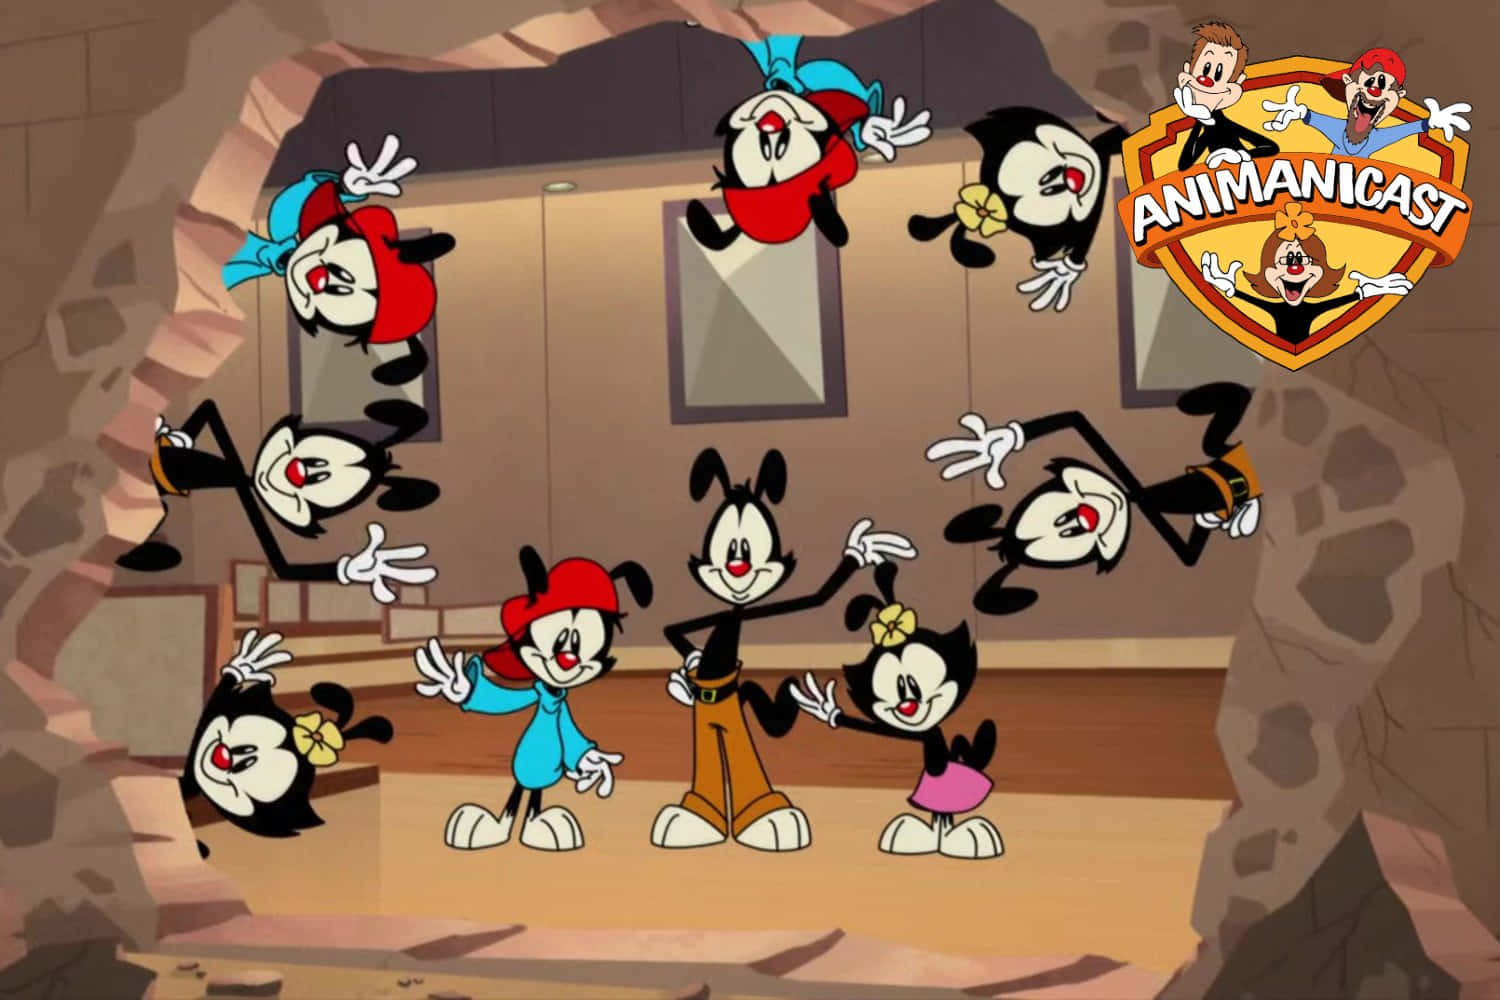 “The Animaniacs Gang Embark on a New Adventure!”